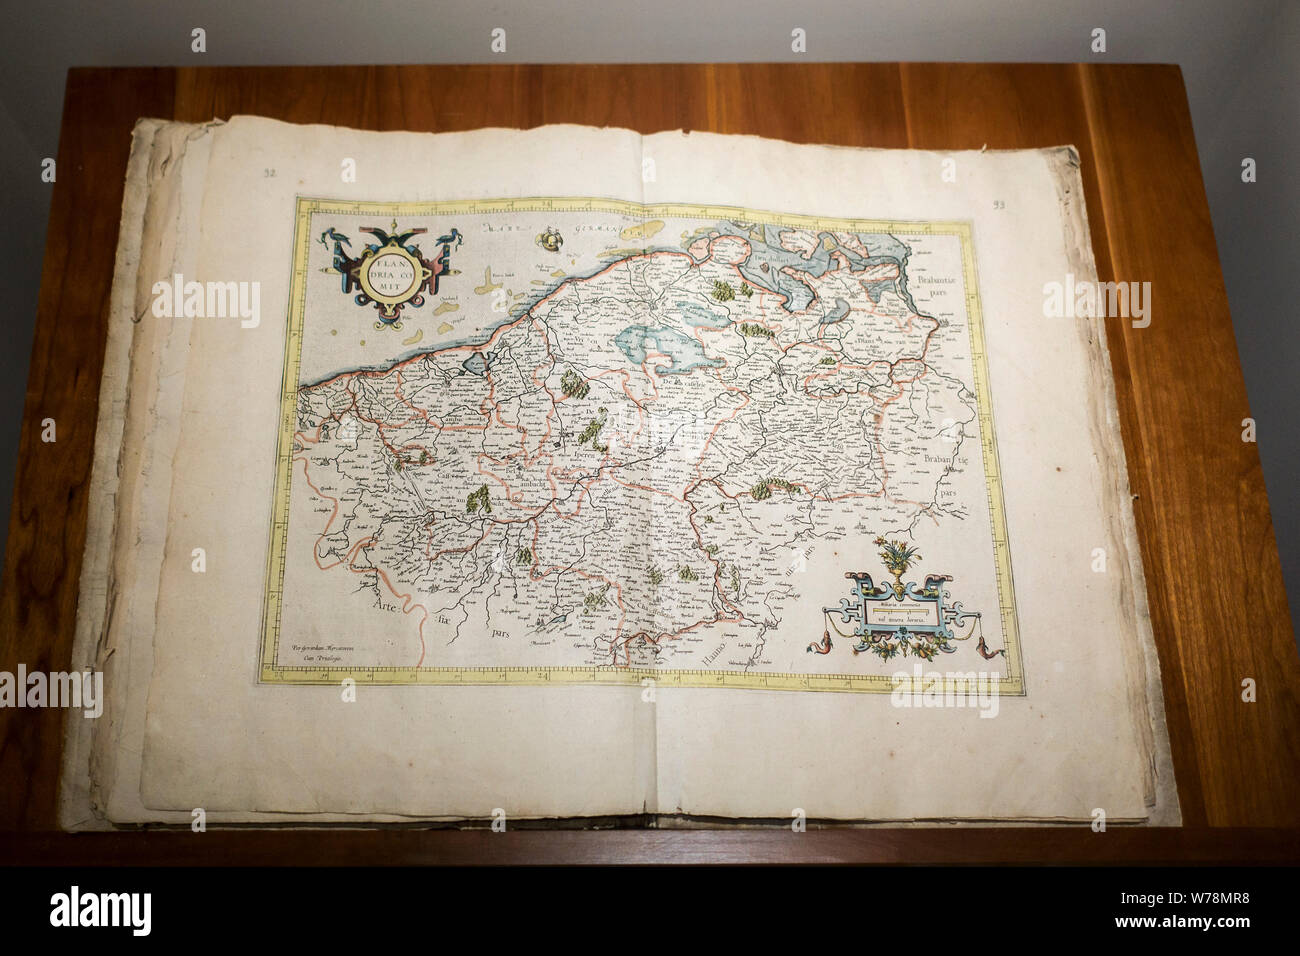 1585 atlas Galliae Tabule Geographicae by 16th-century geographer Gerardus Mercator showing map of the Netherlands / Belgii Inferioris Stock Photo